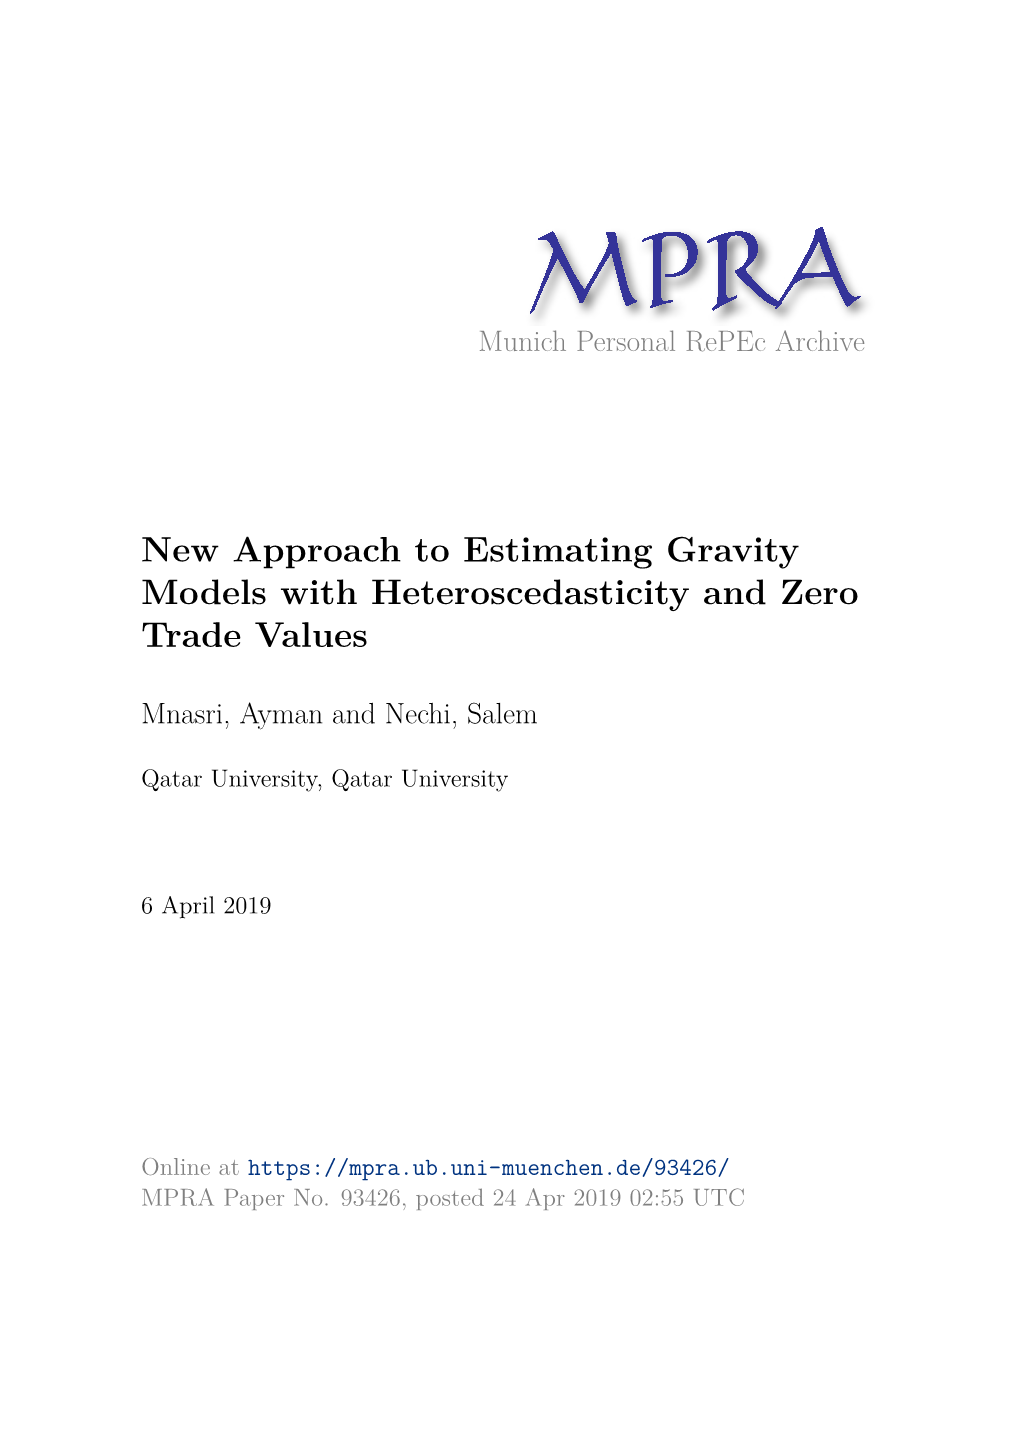 New Approach to Estimating Gravity Models with Heteroscedasticity and Zero Trade Values